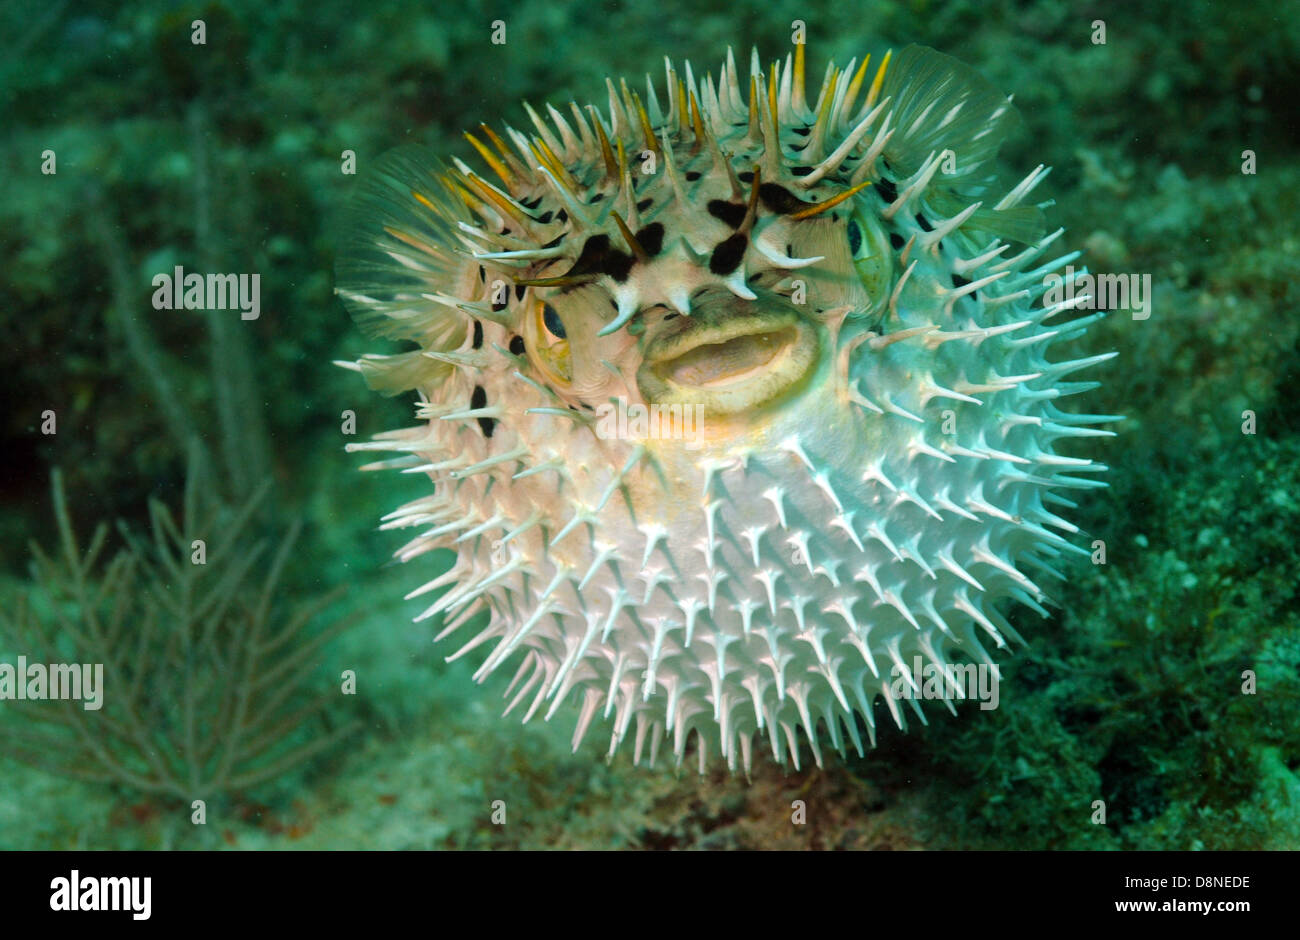 Blowfish High Resolution Stock Photography and Images - Alamy